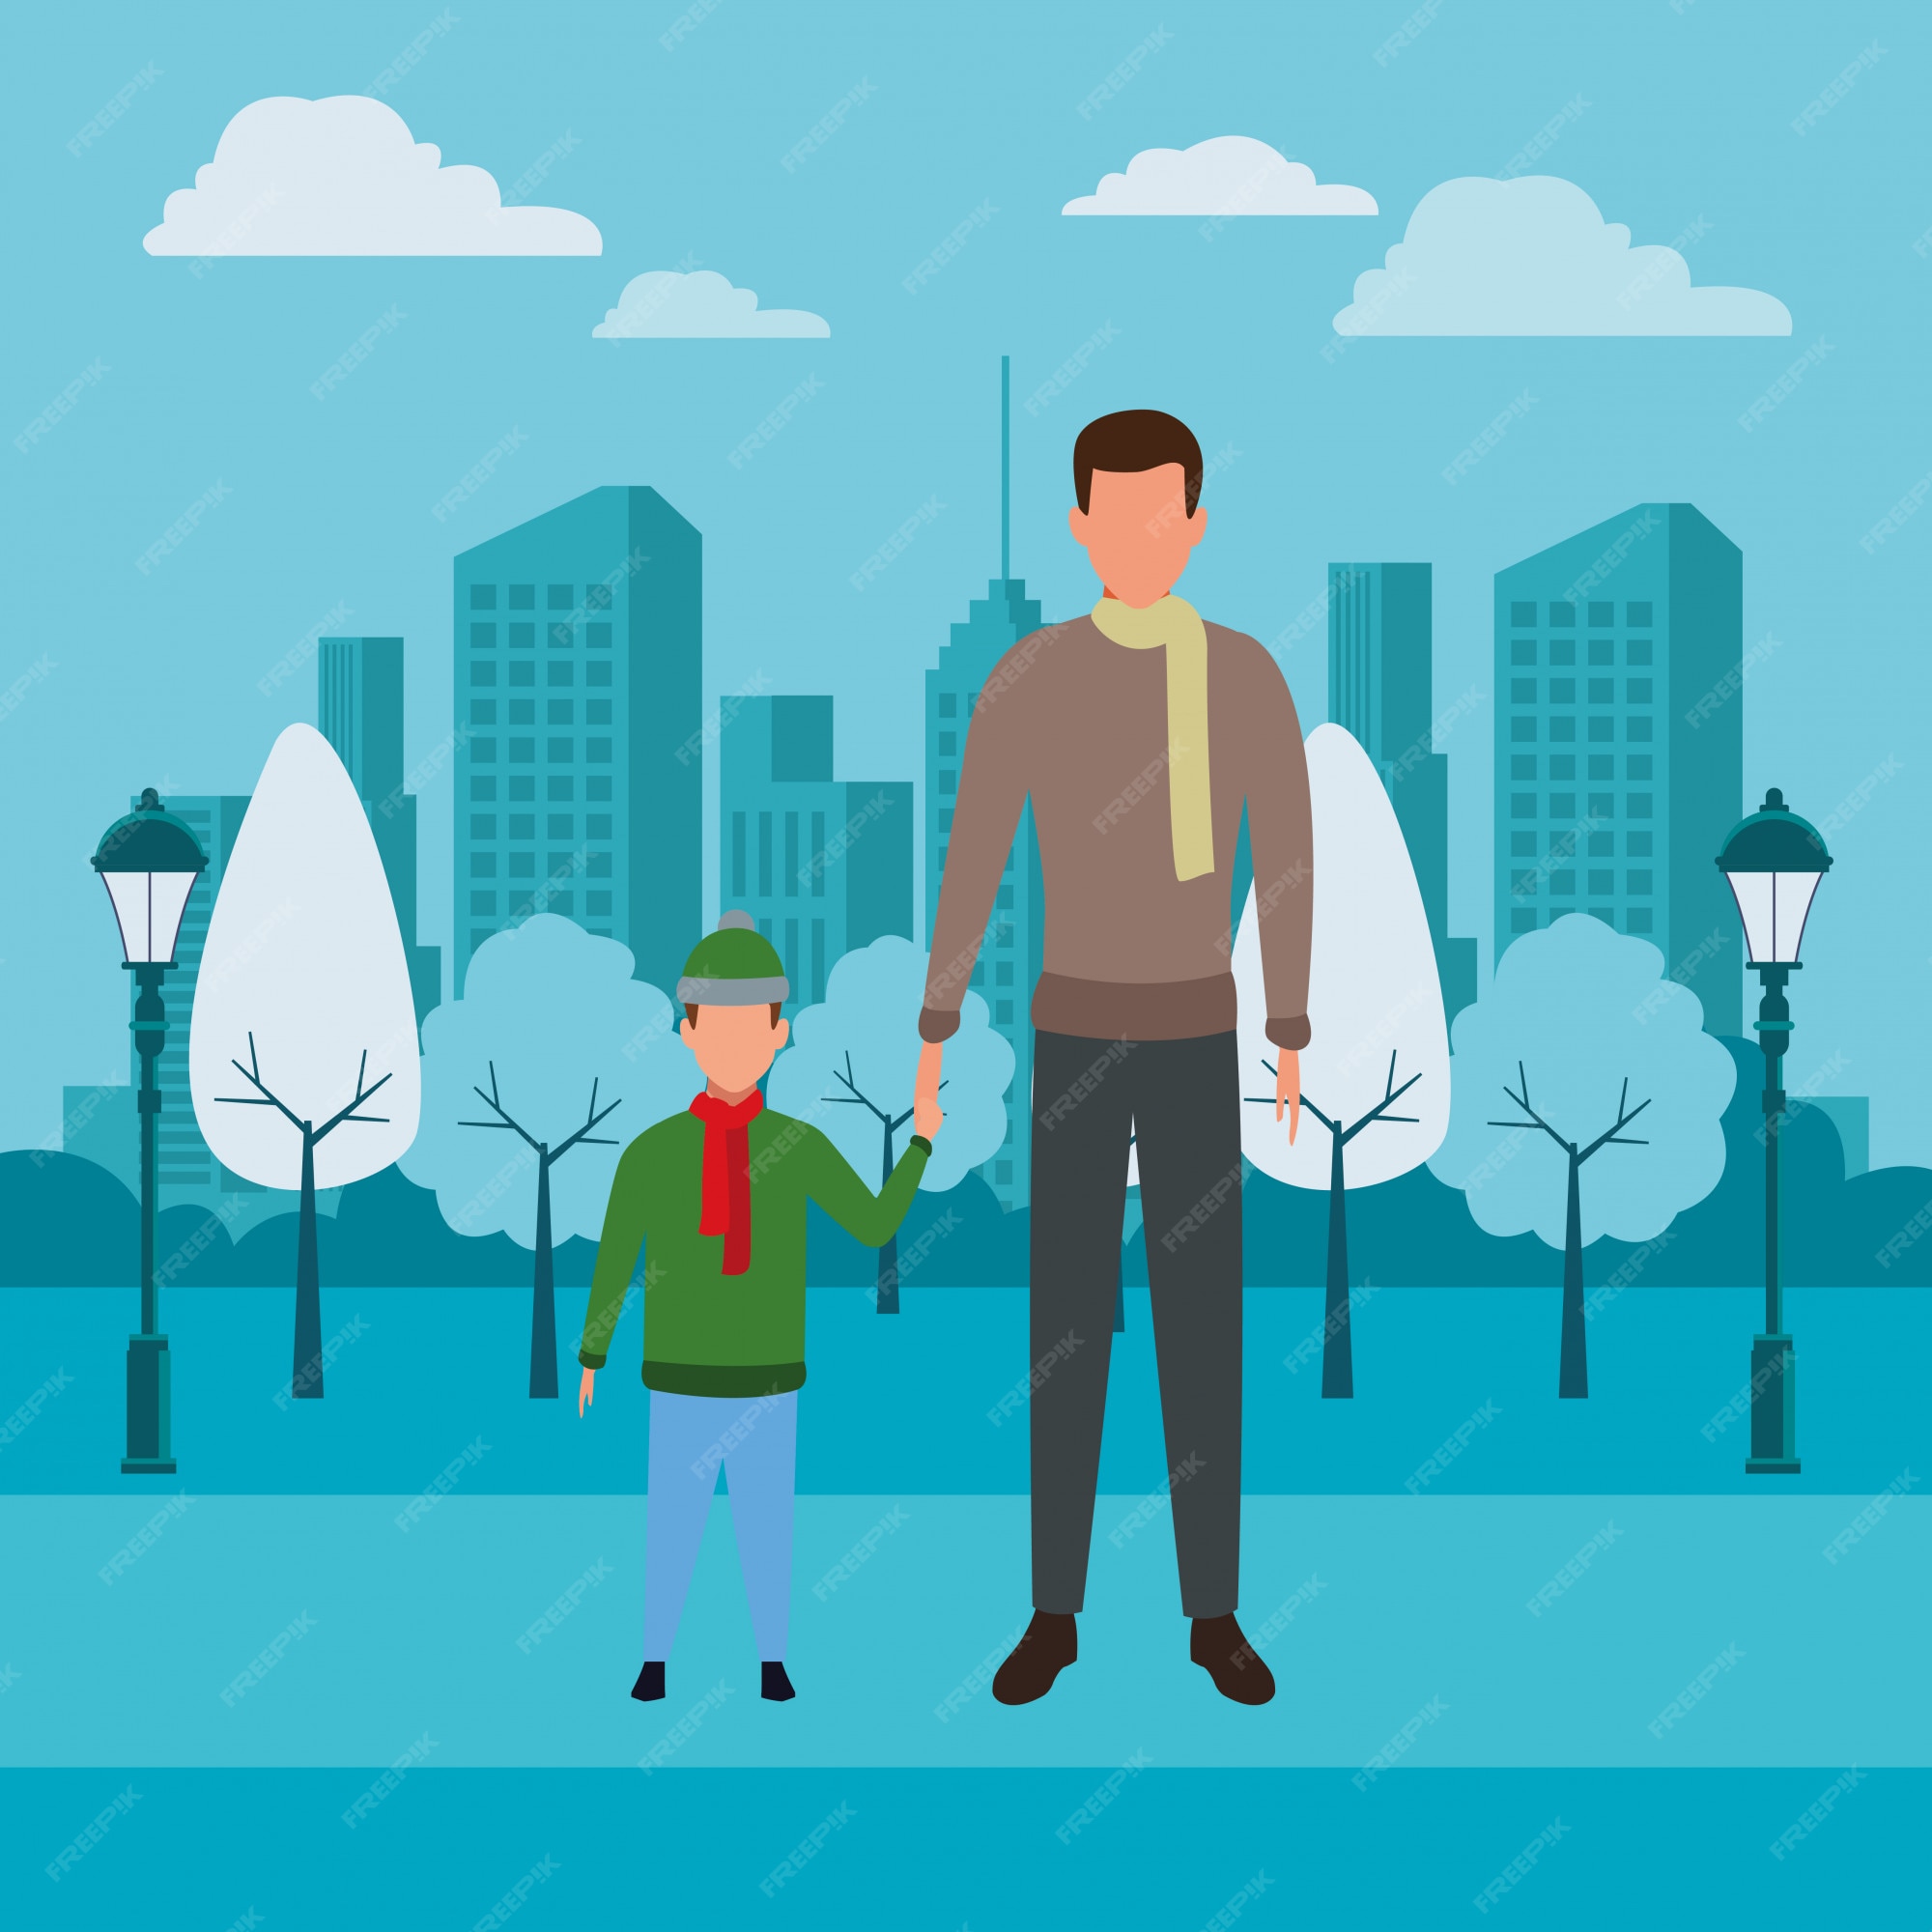 Premium Vector Man Holding Hand With Child